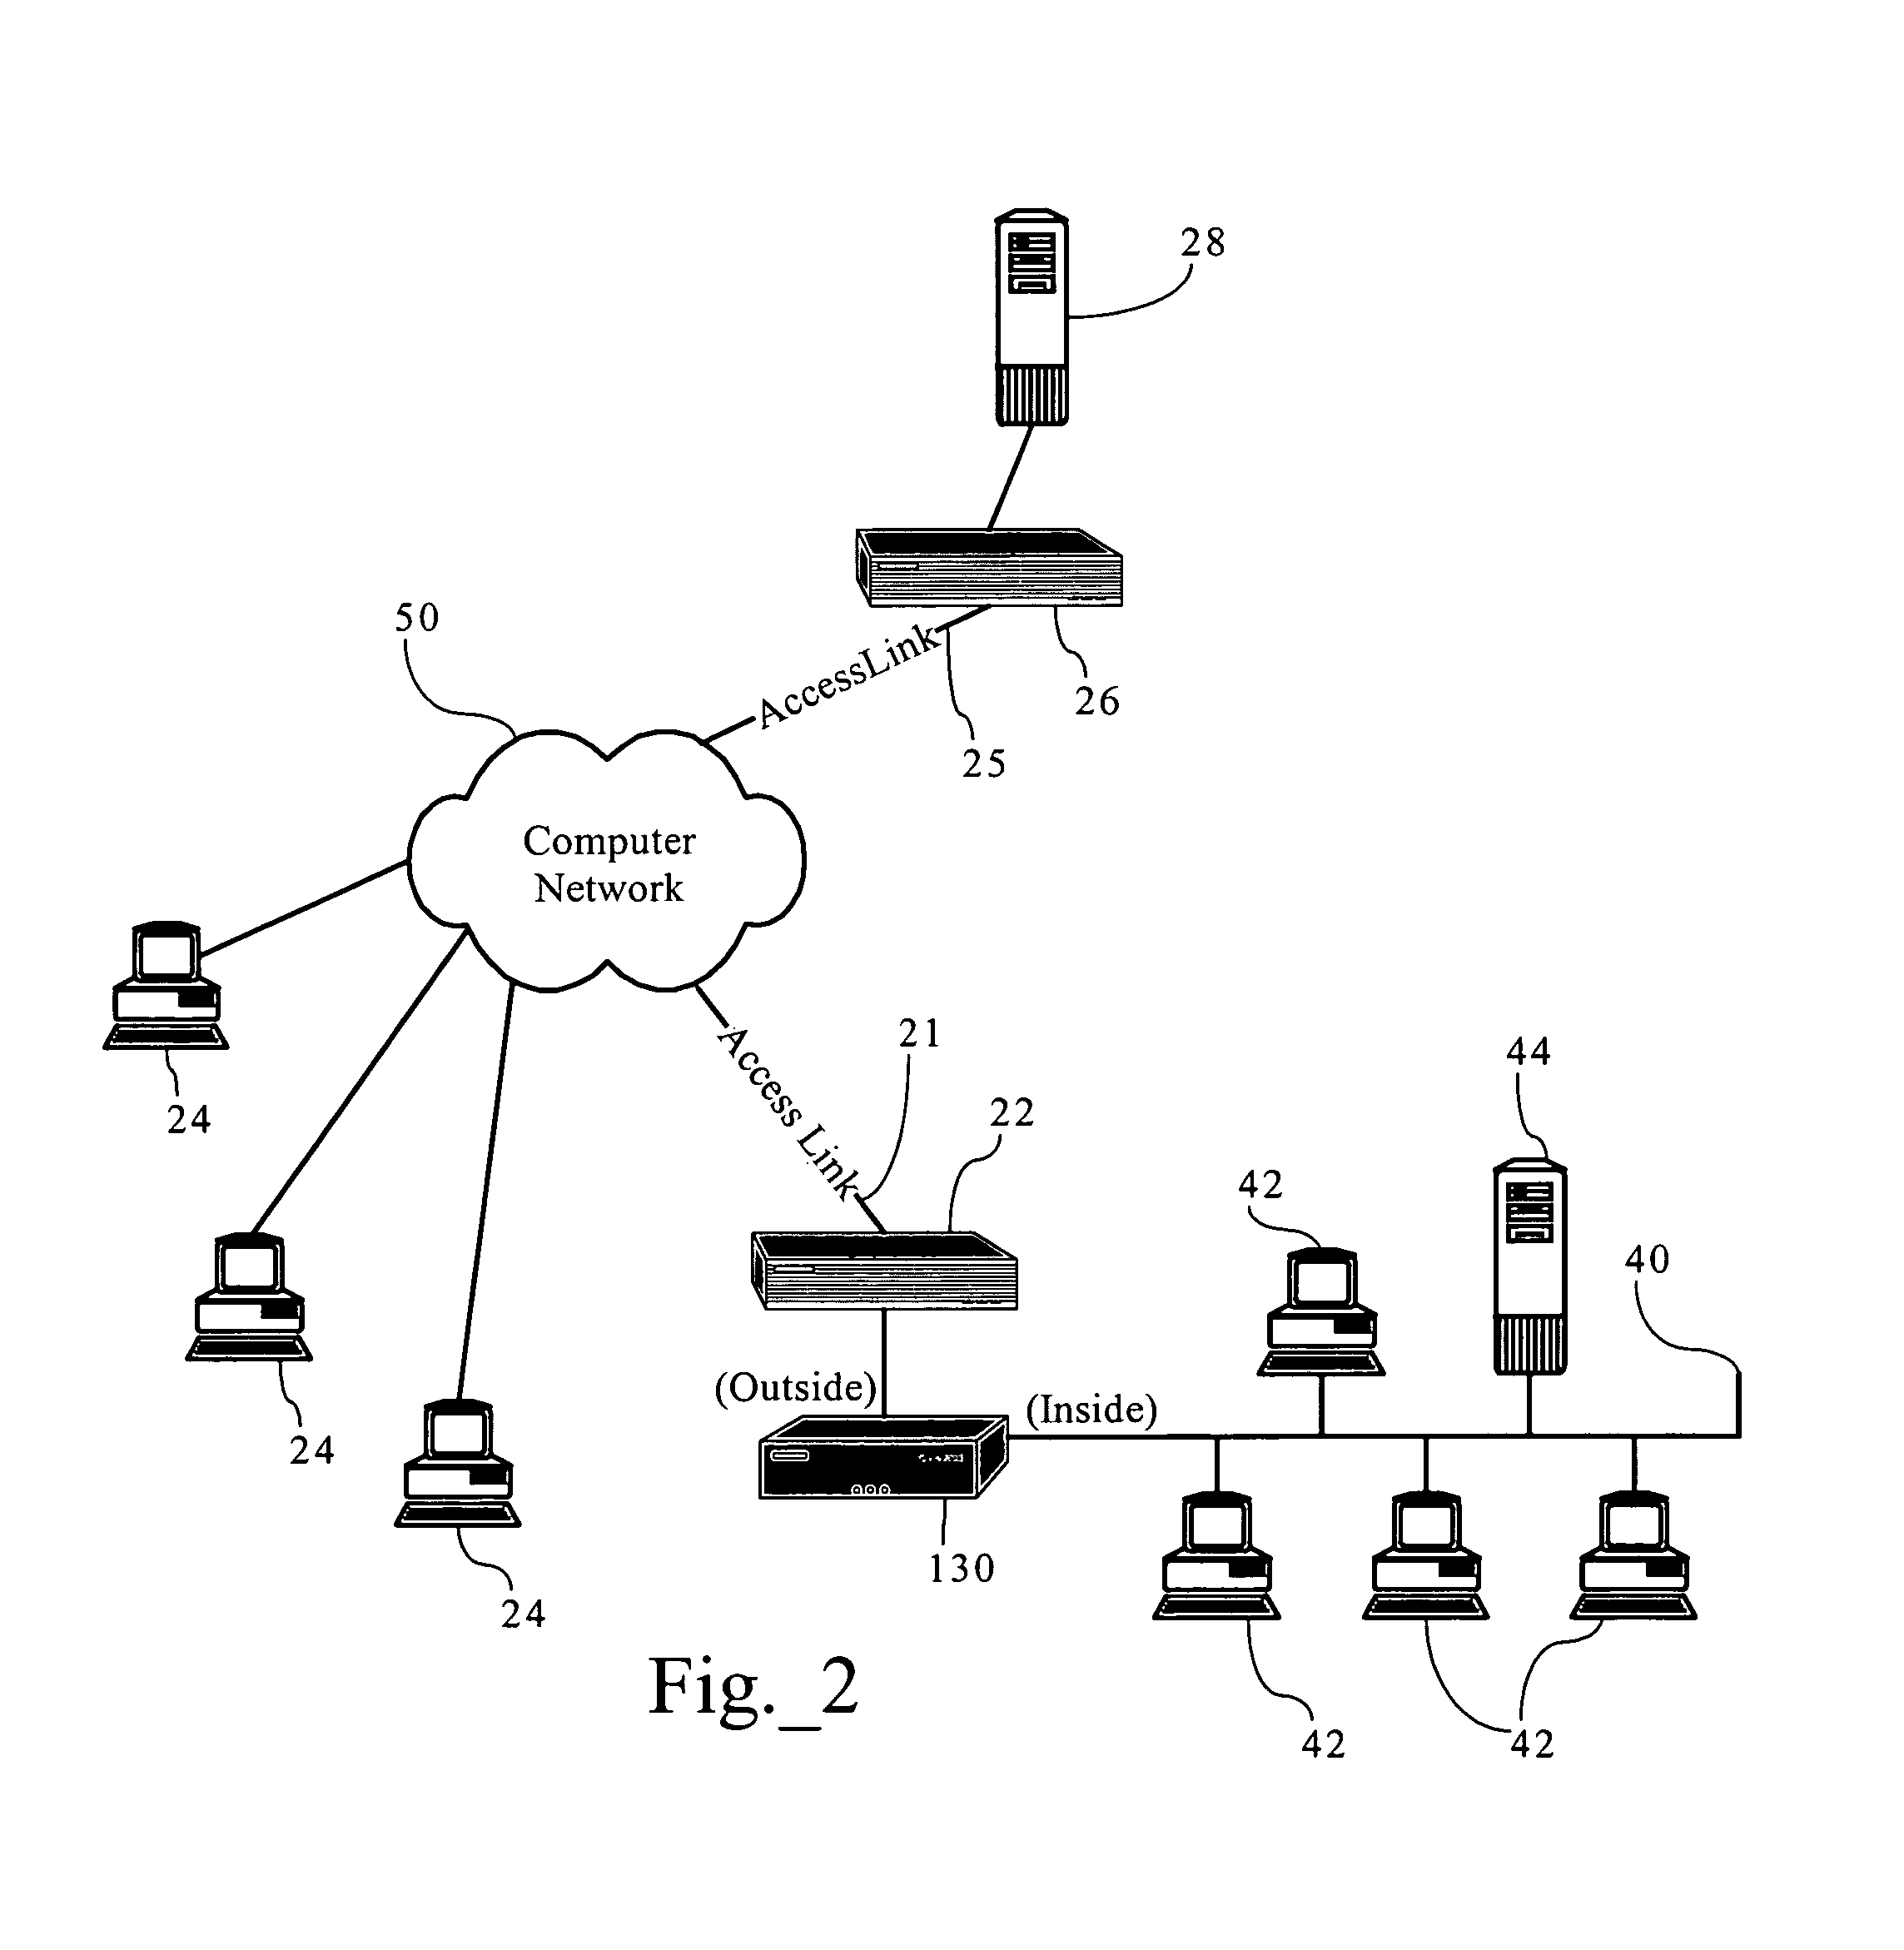 Automatic network traffic discovery and classification mechanism including dynamic discovery thresholds